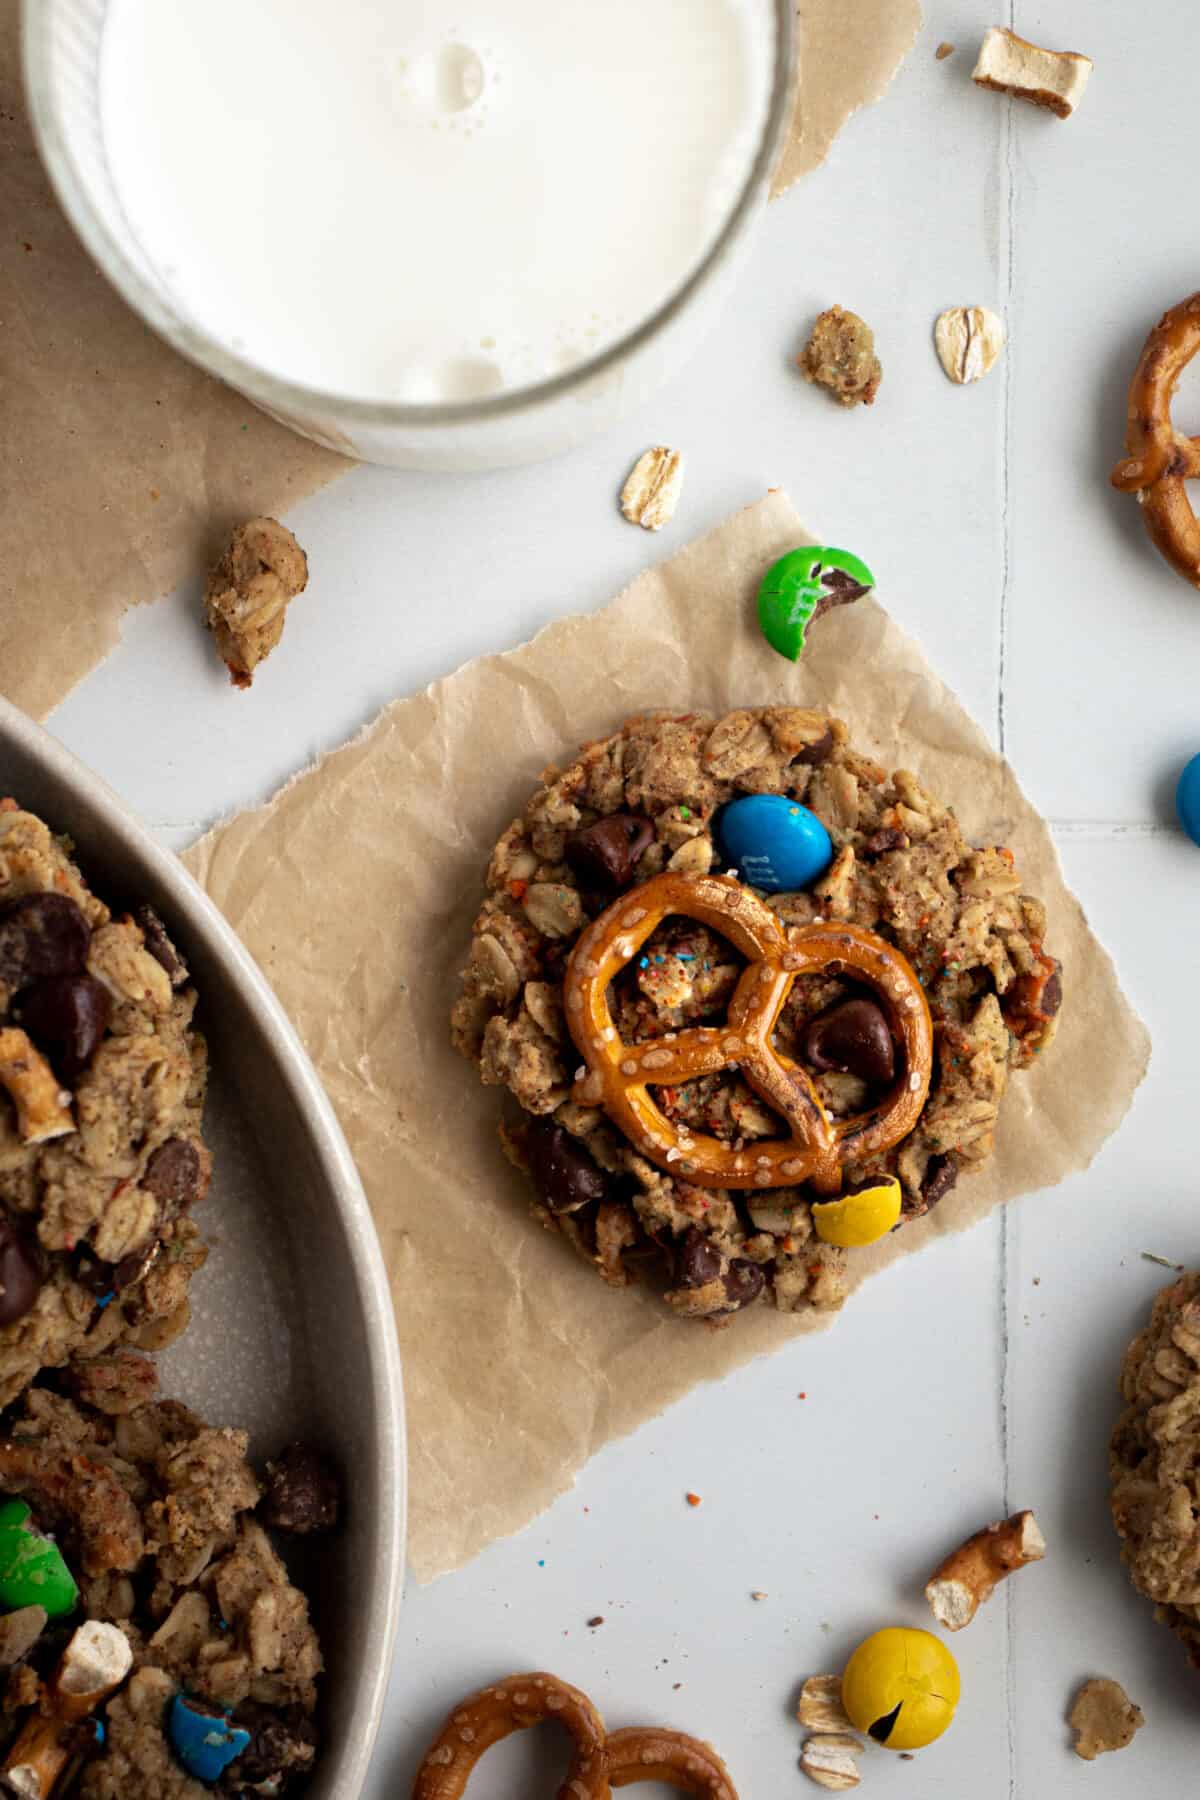 Kitchen sink cookie topped with a pretzel.